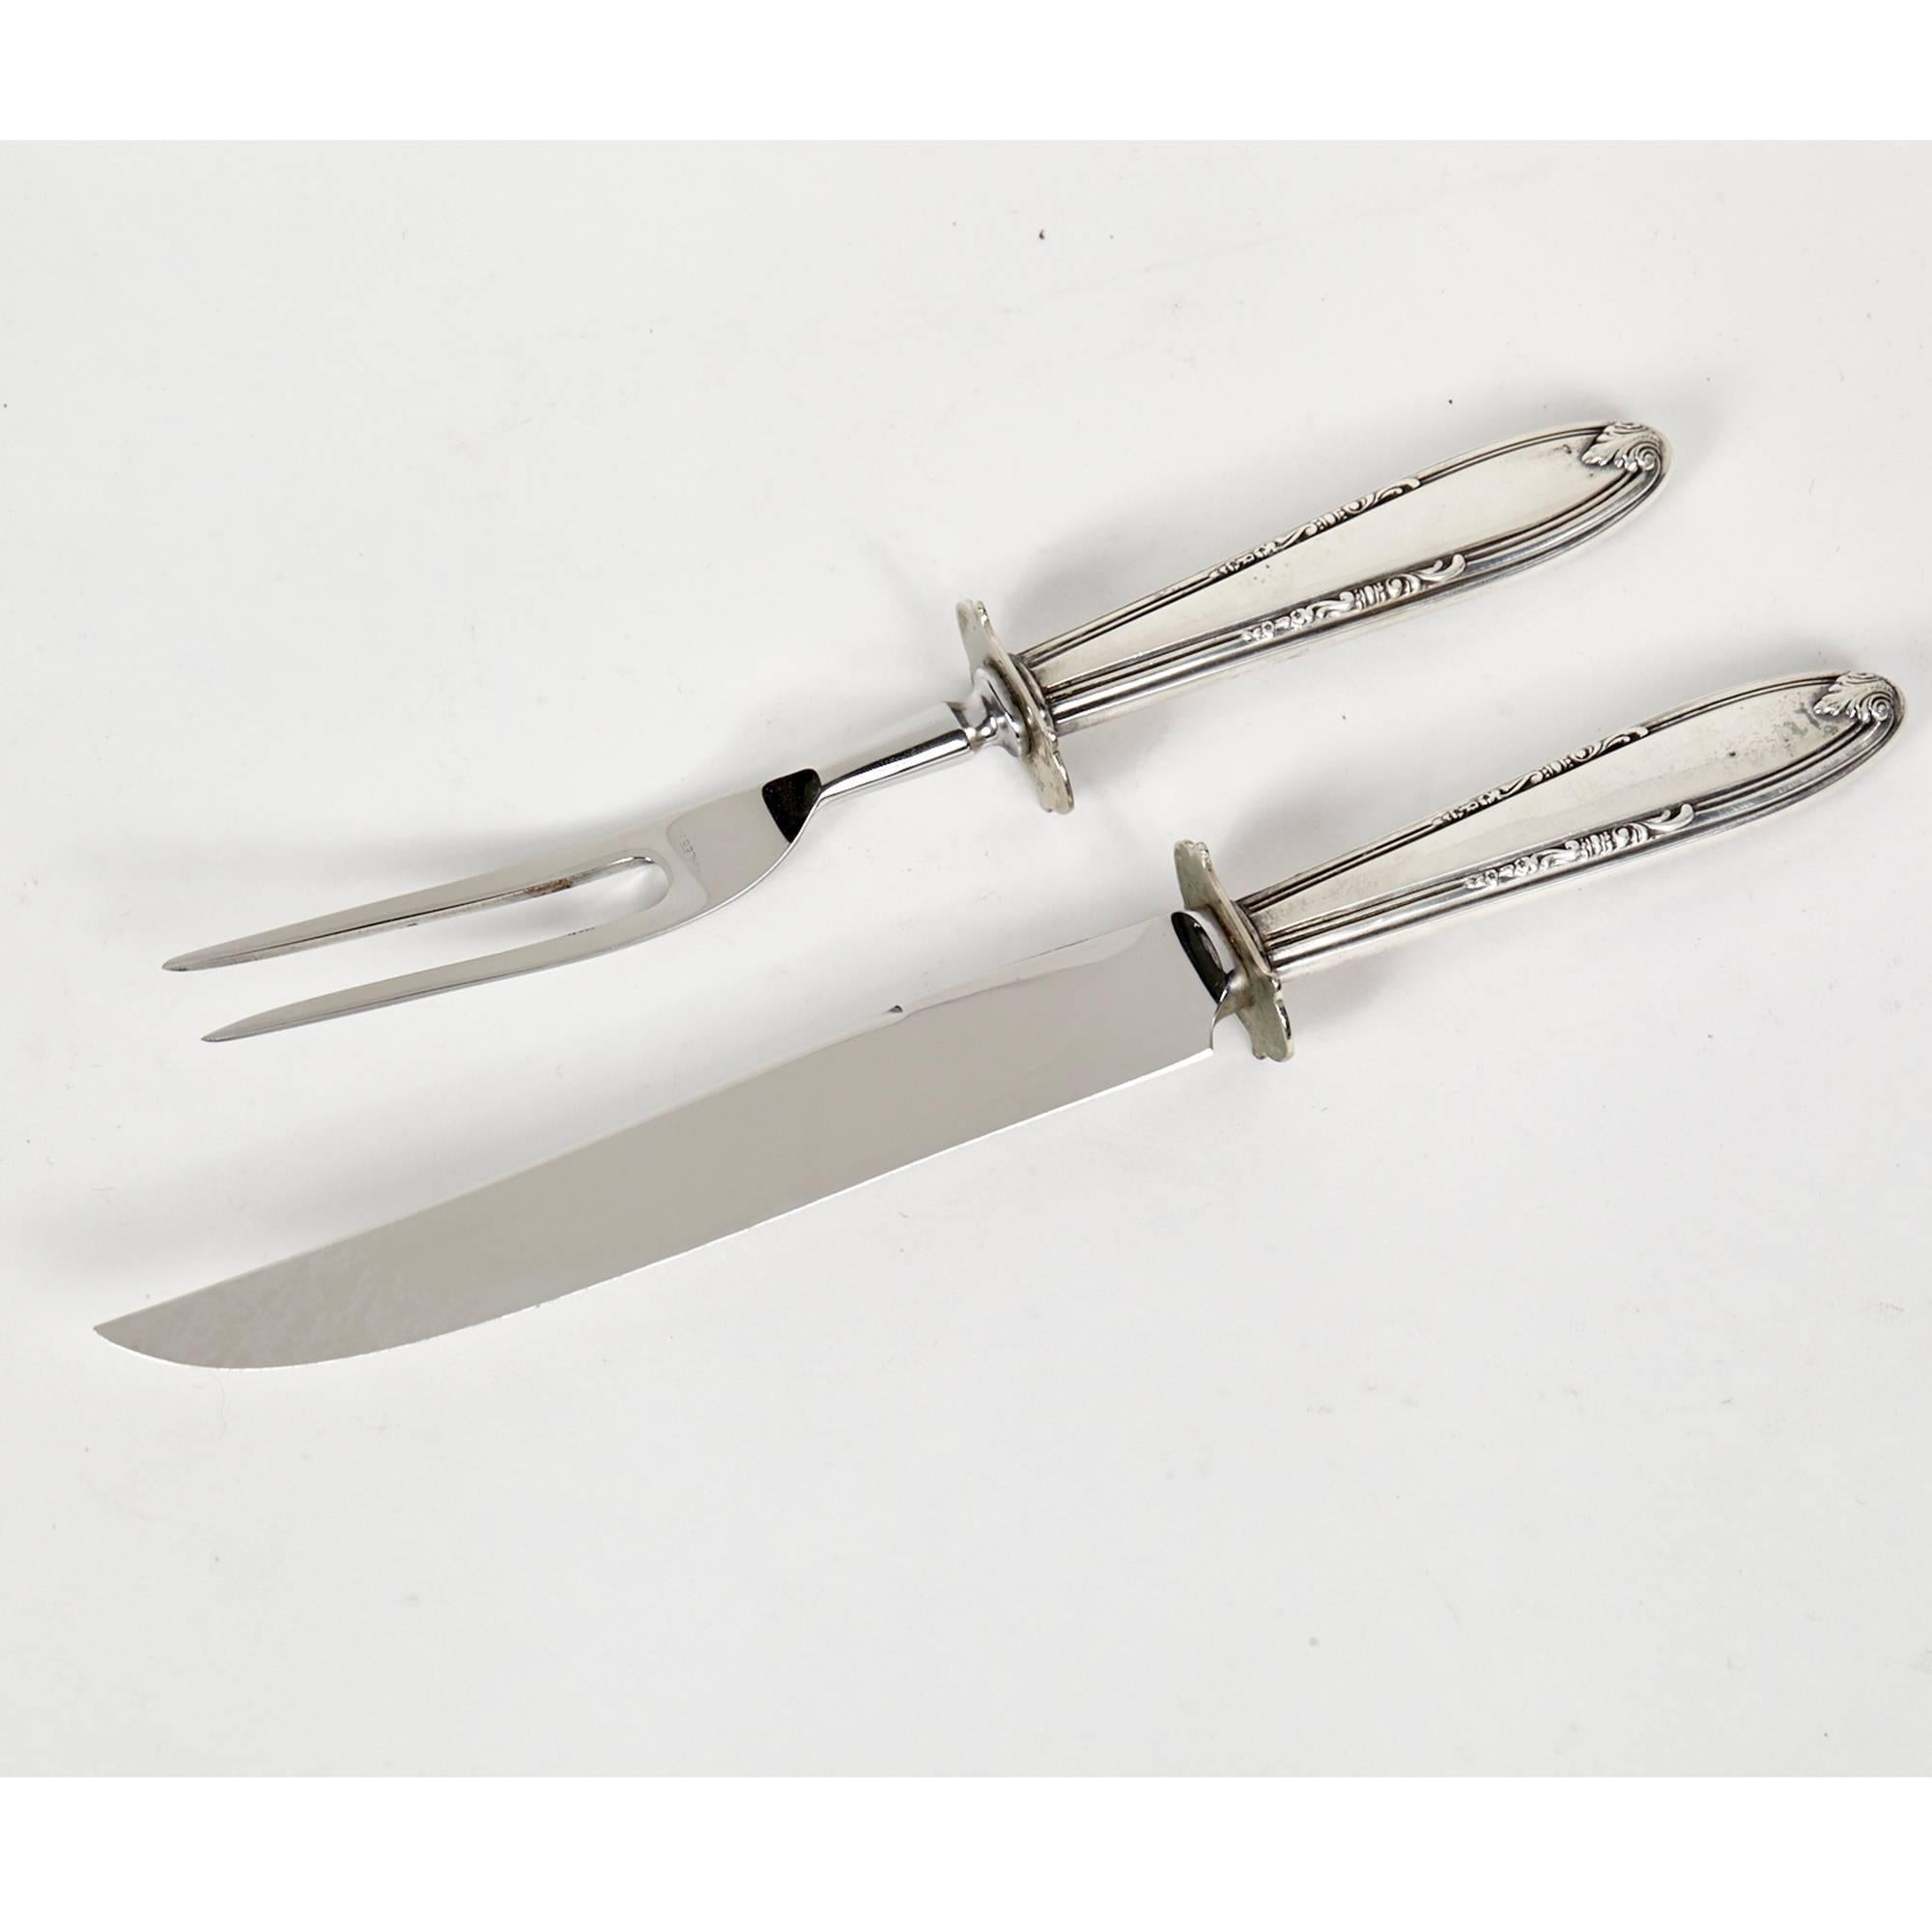 Pair of sterling silver handled carving fork and knife set, circa 1950s. Measures: Fork 8.75